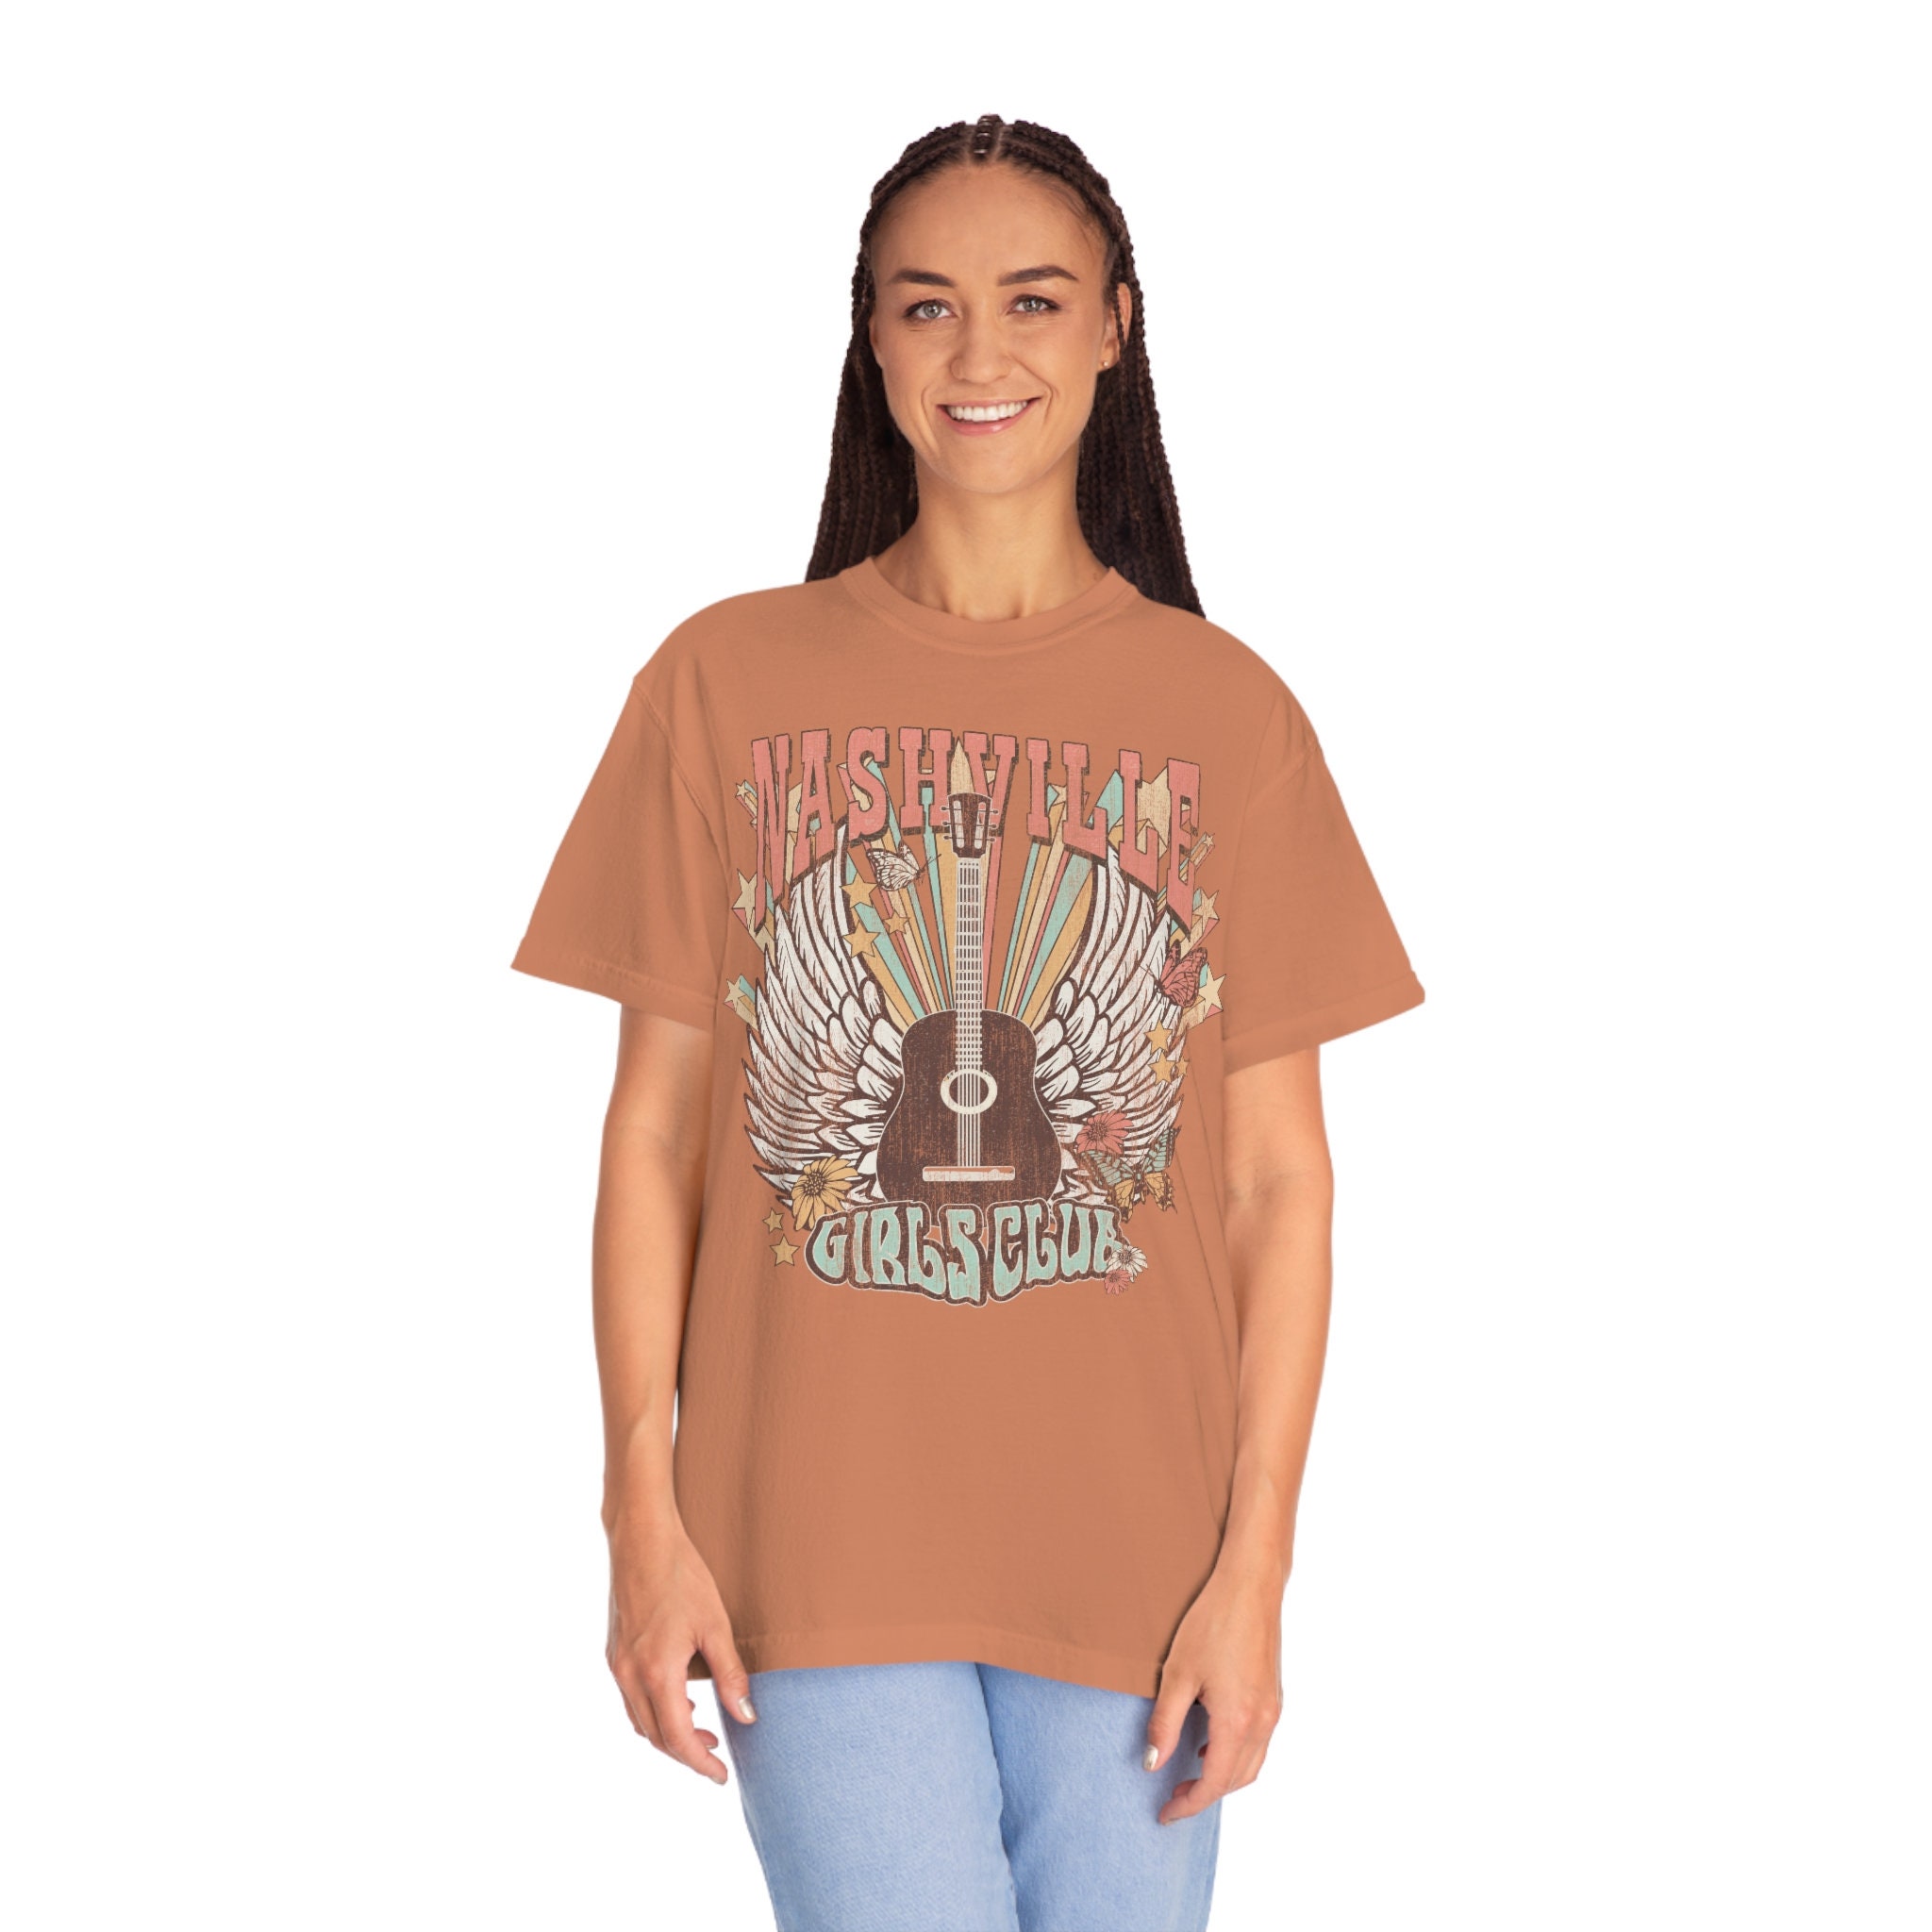 Discover Nashville Shirt, Cowgirl Tee, Western Graphic Tee